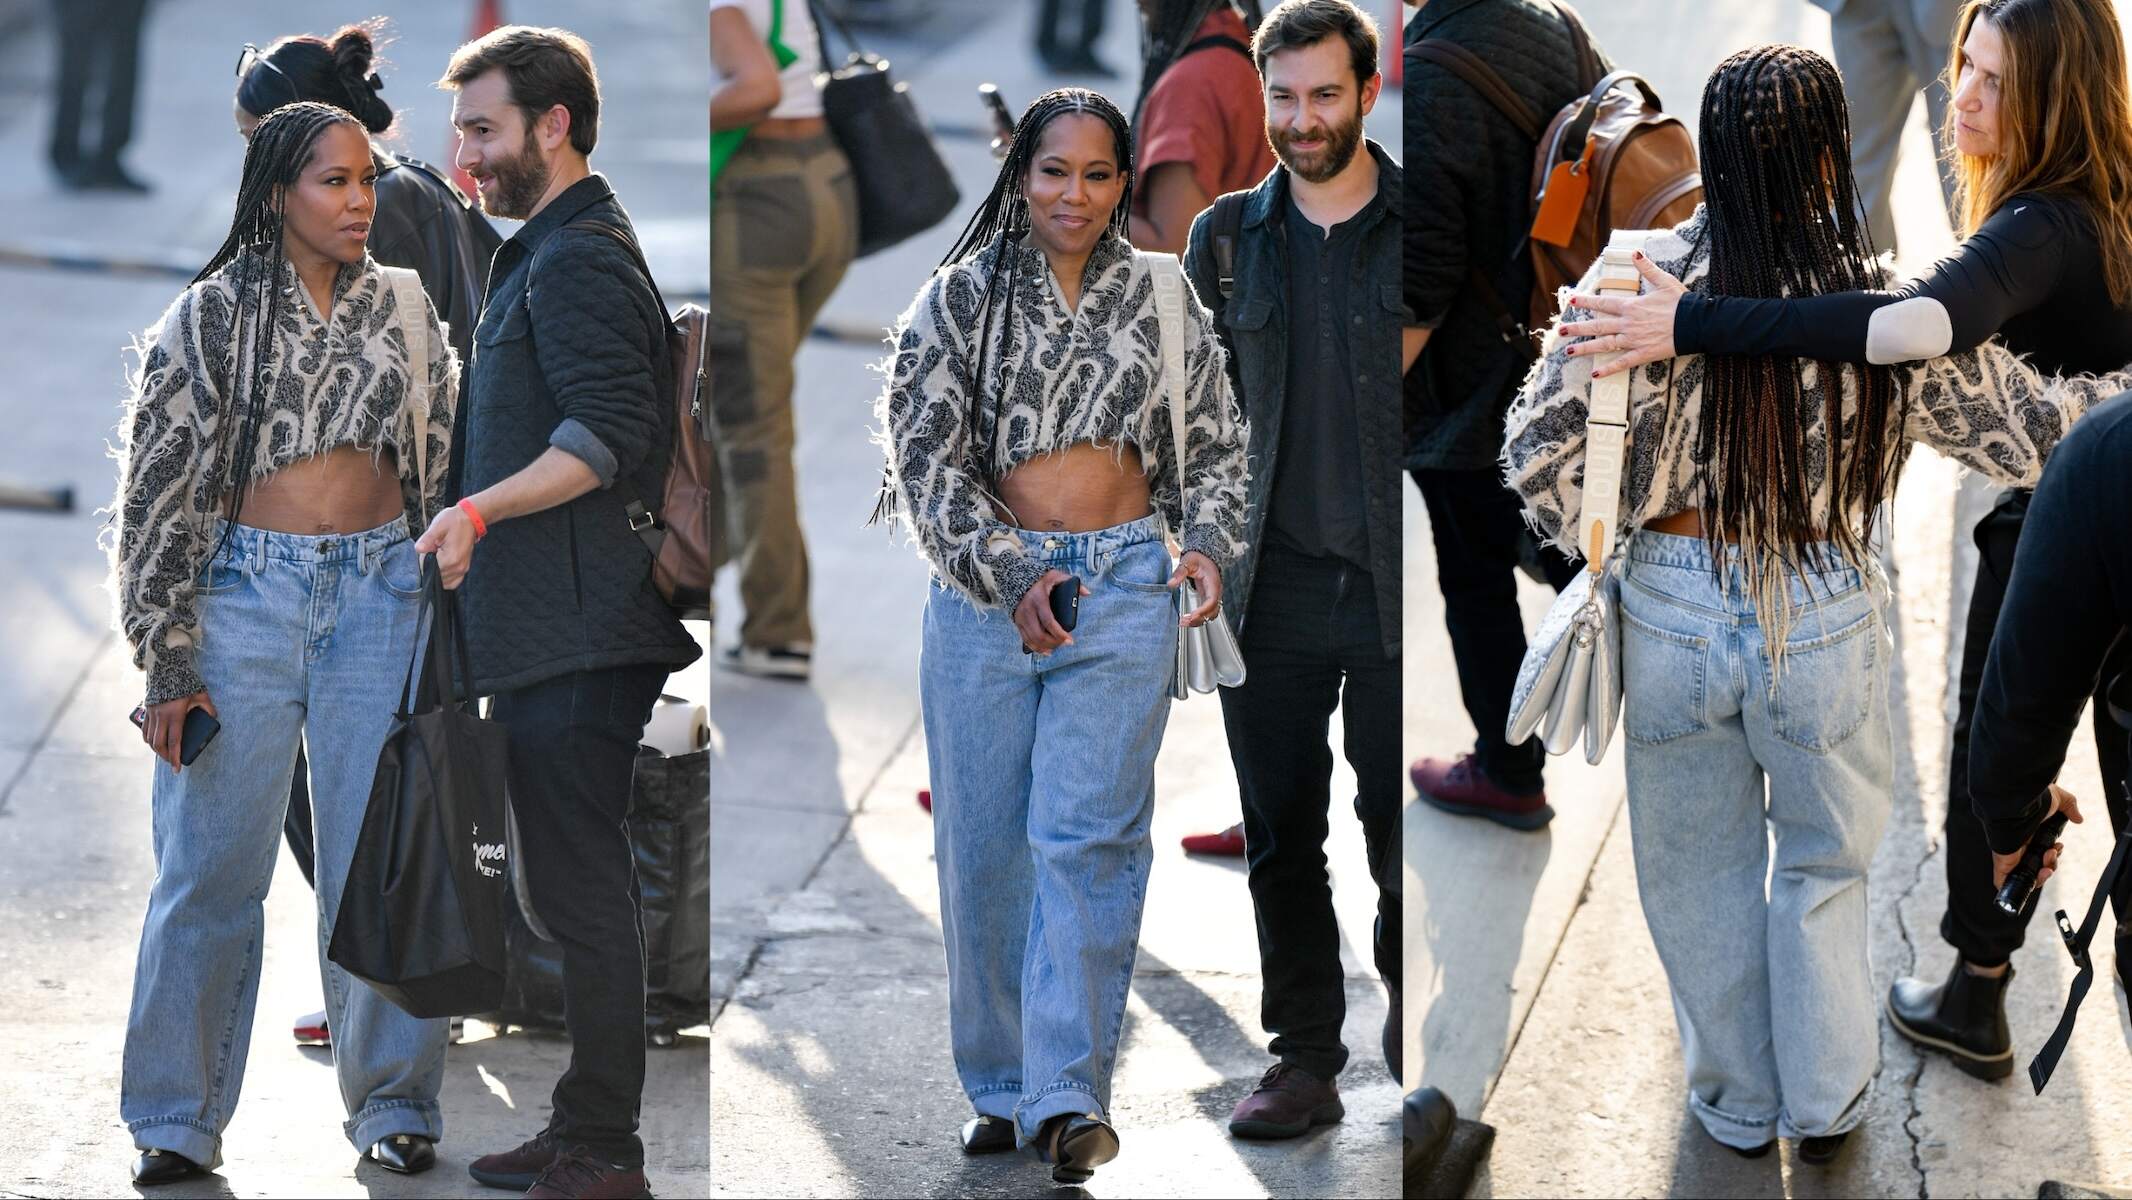 Wearing baggy jeans and a crop top, Regina King speaks to her team while walking in NYC